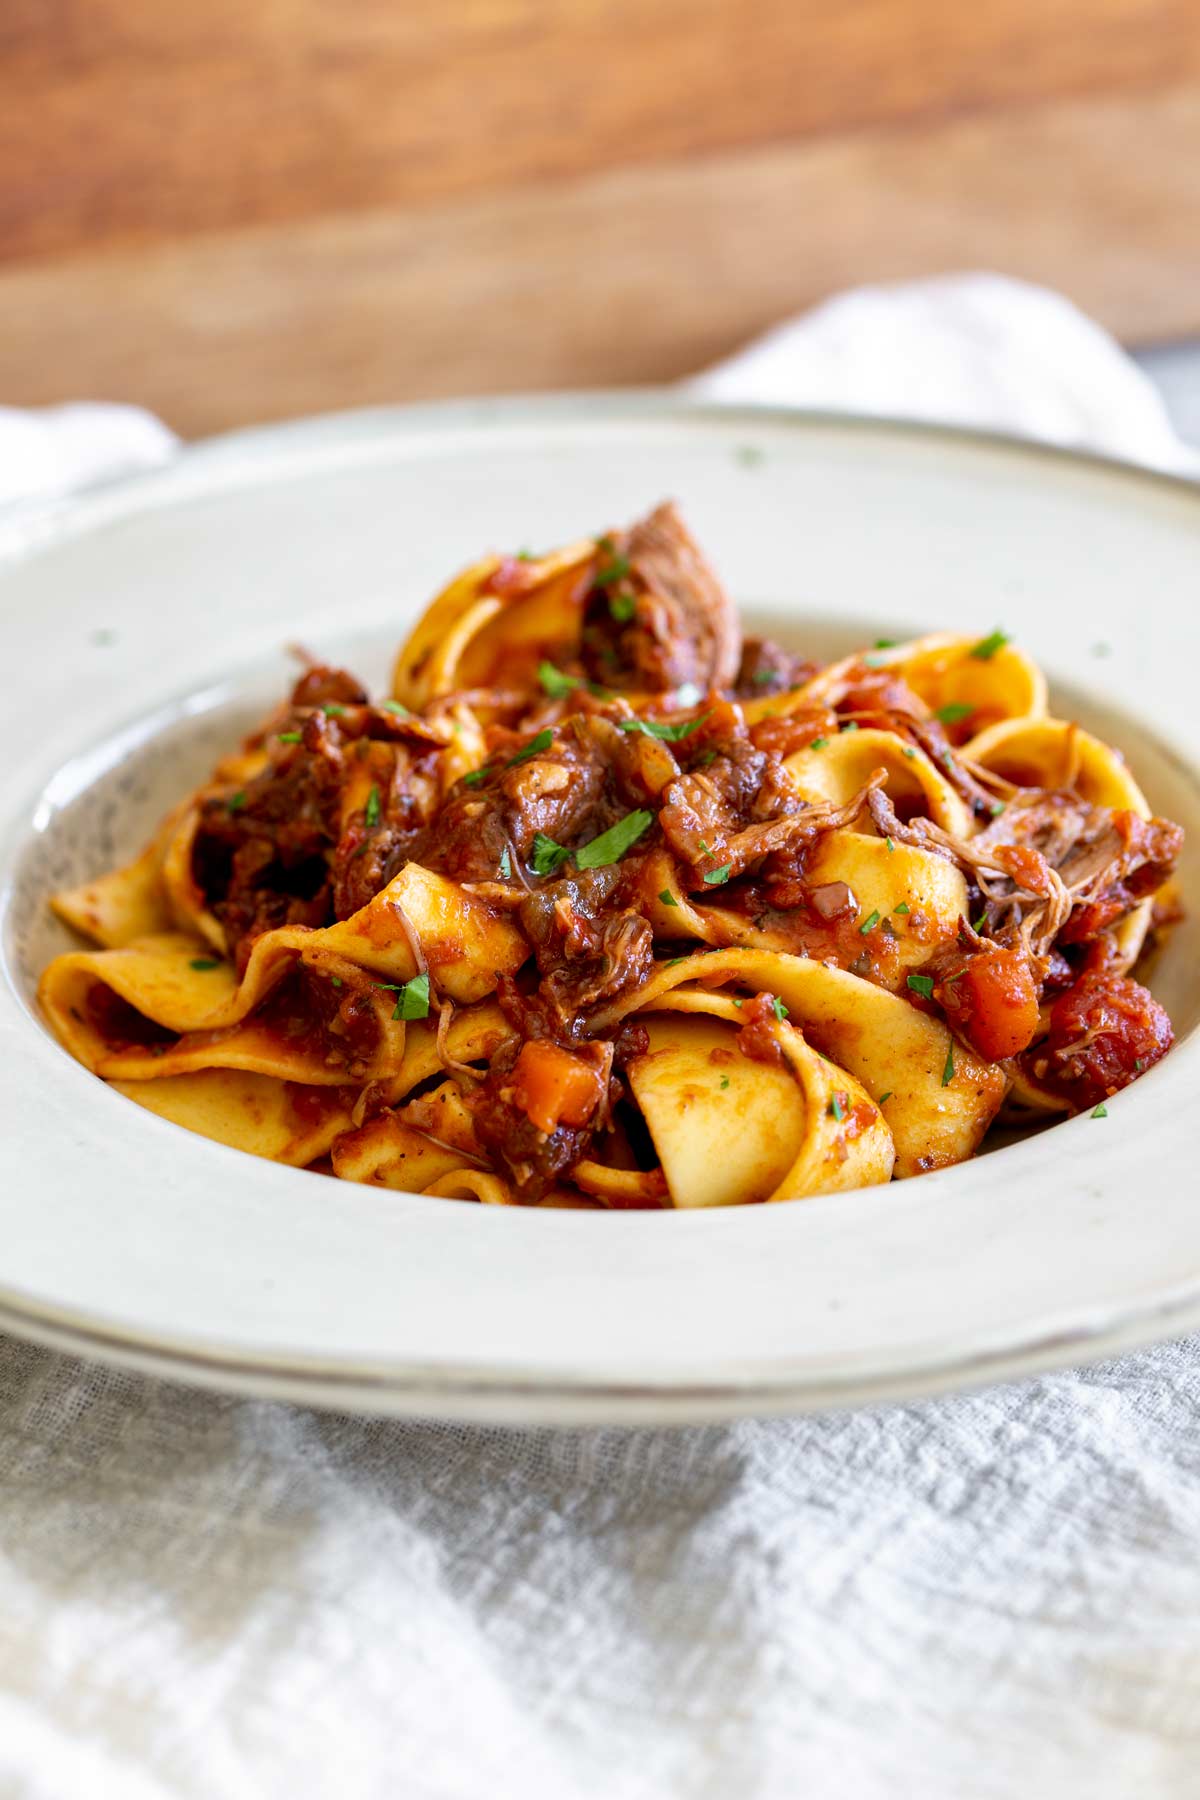 a rustic wide bowl with thick pasta and shredded meat sauce on a linen napkin